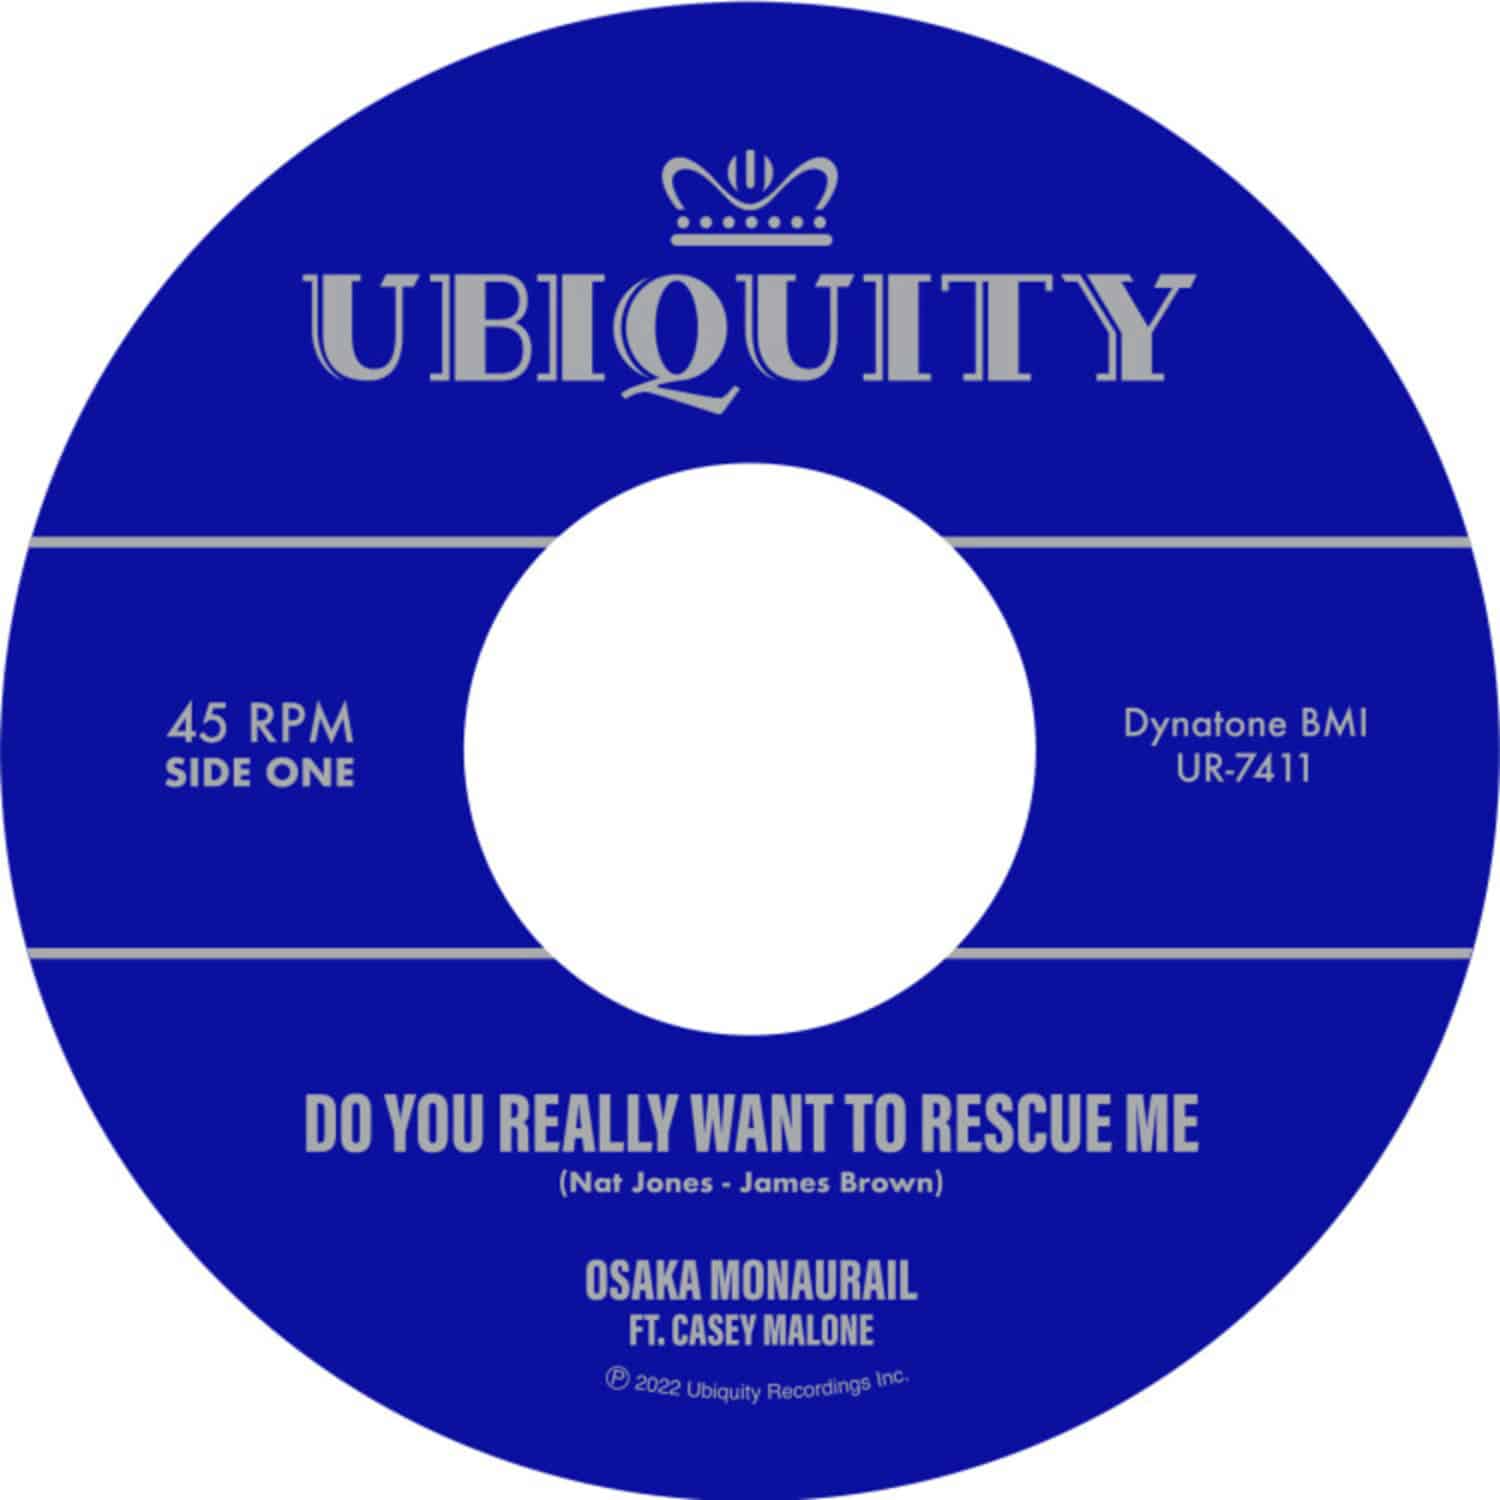 Osaka Monaurail - DO YOU REALLY WANT TO RESCUE ME 